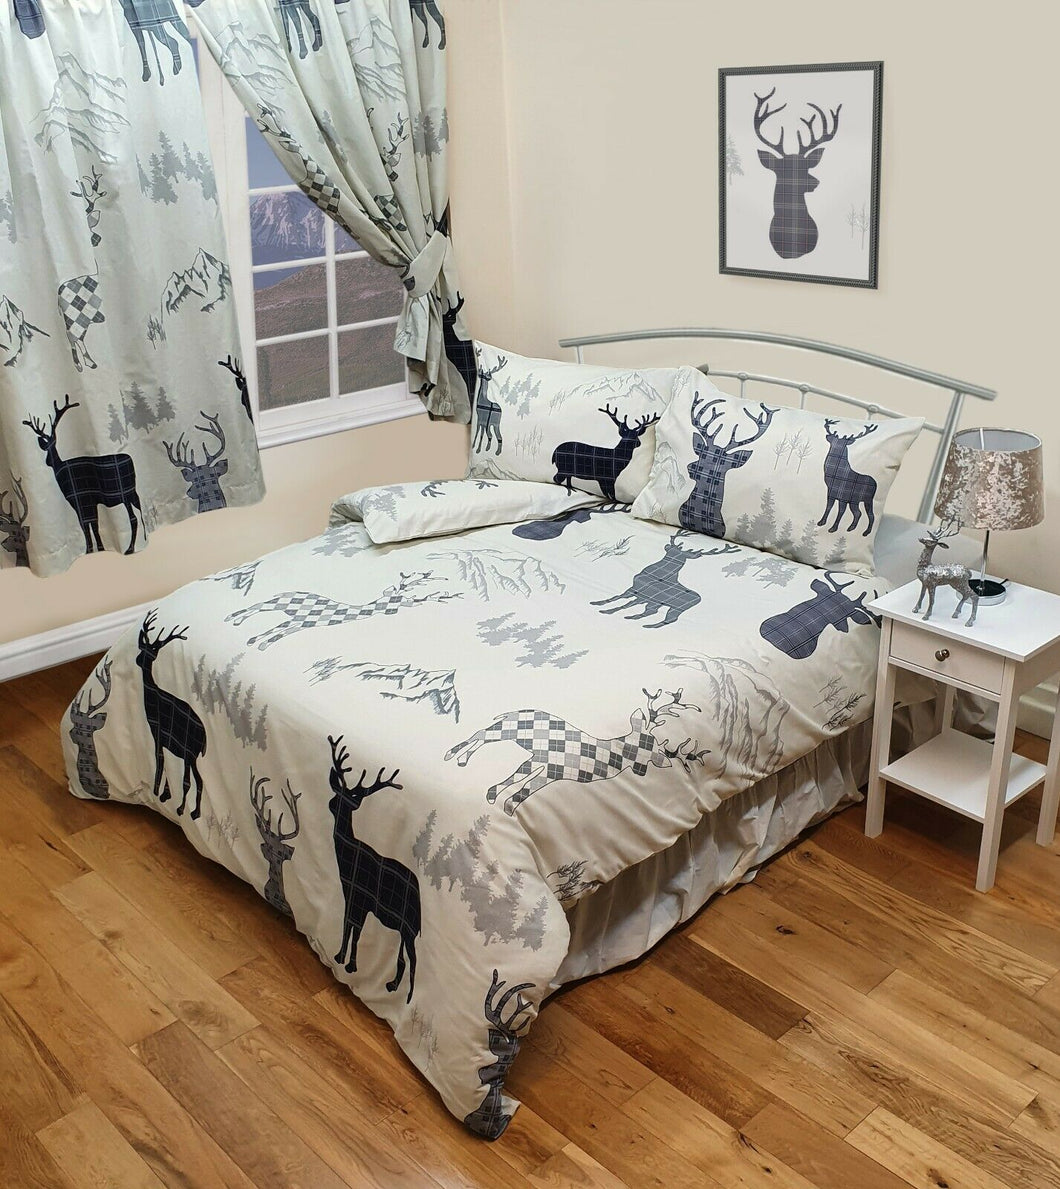 King Size Highland Stag Duvet Cover Set Reversible Navy Cream Grey Mountains